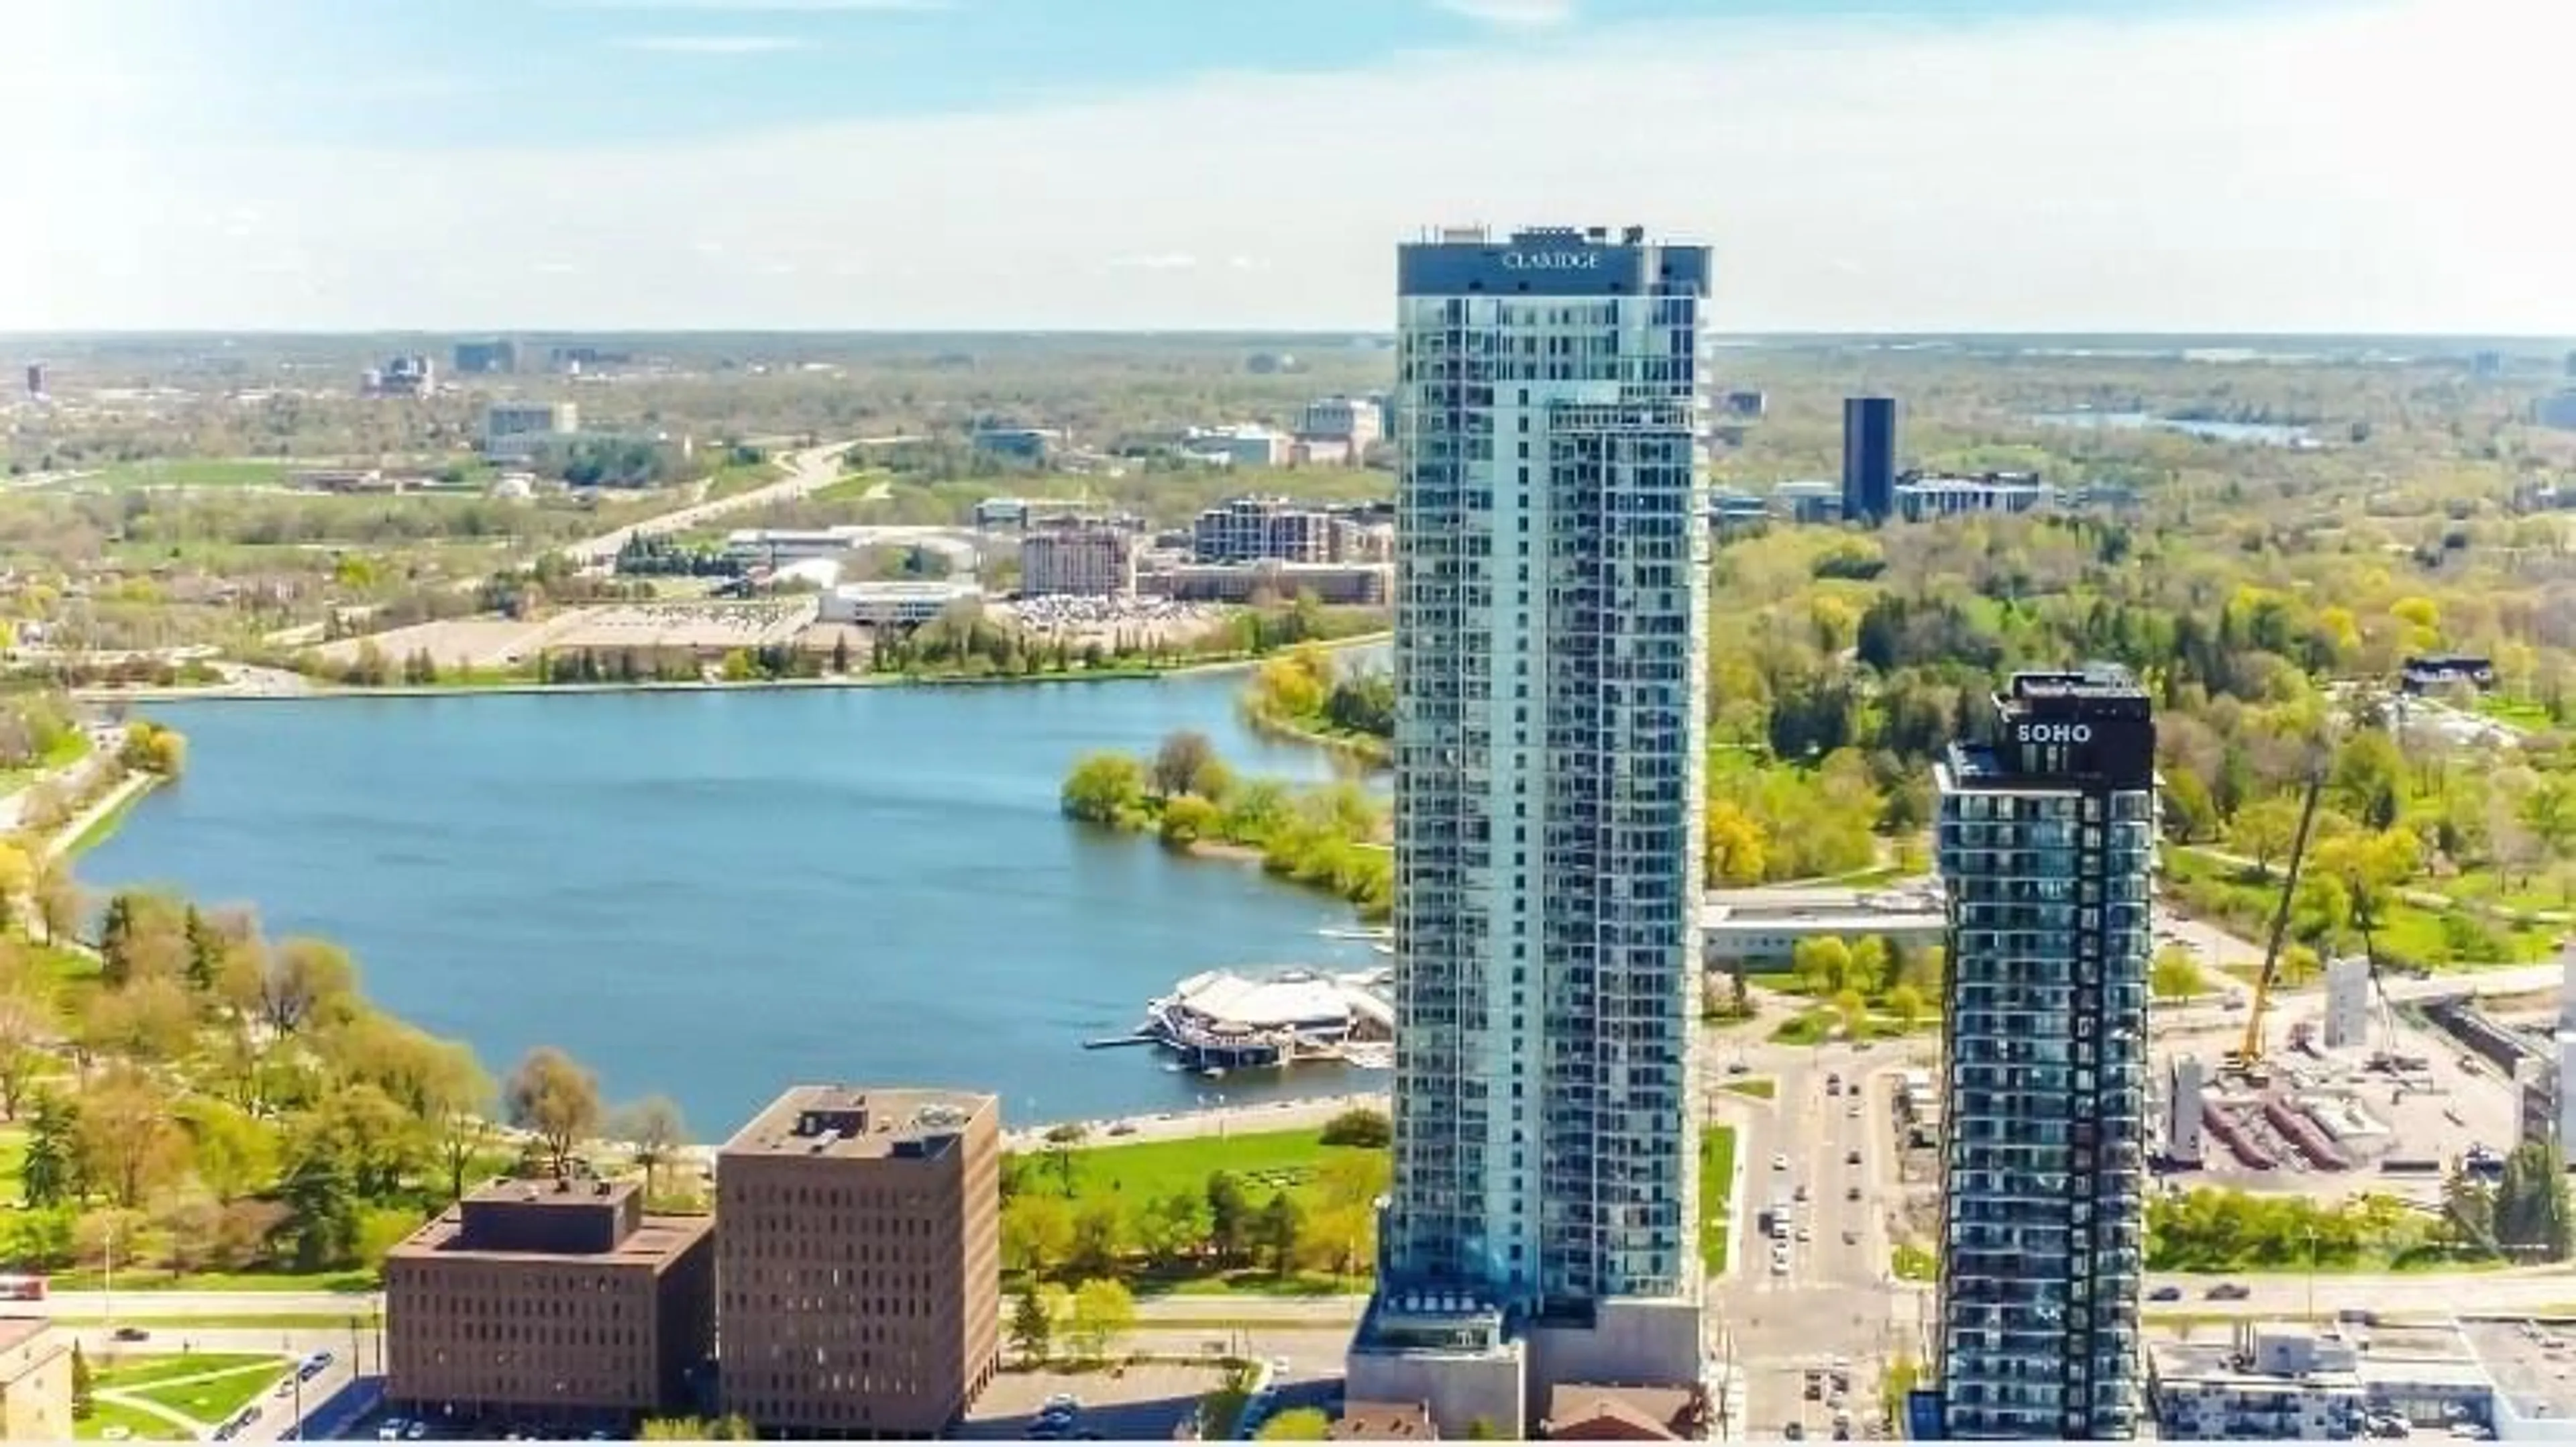 Lakeview for 805 CARLING Ave #3206, Ottawa Ontario K1S 5W9